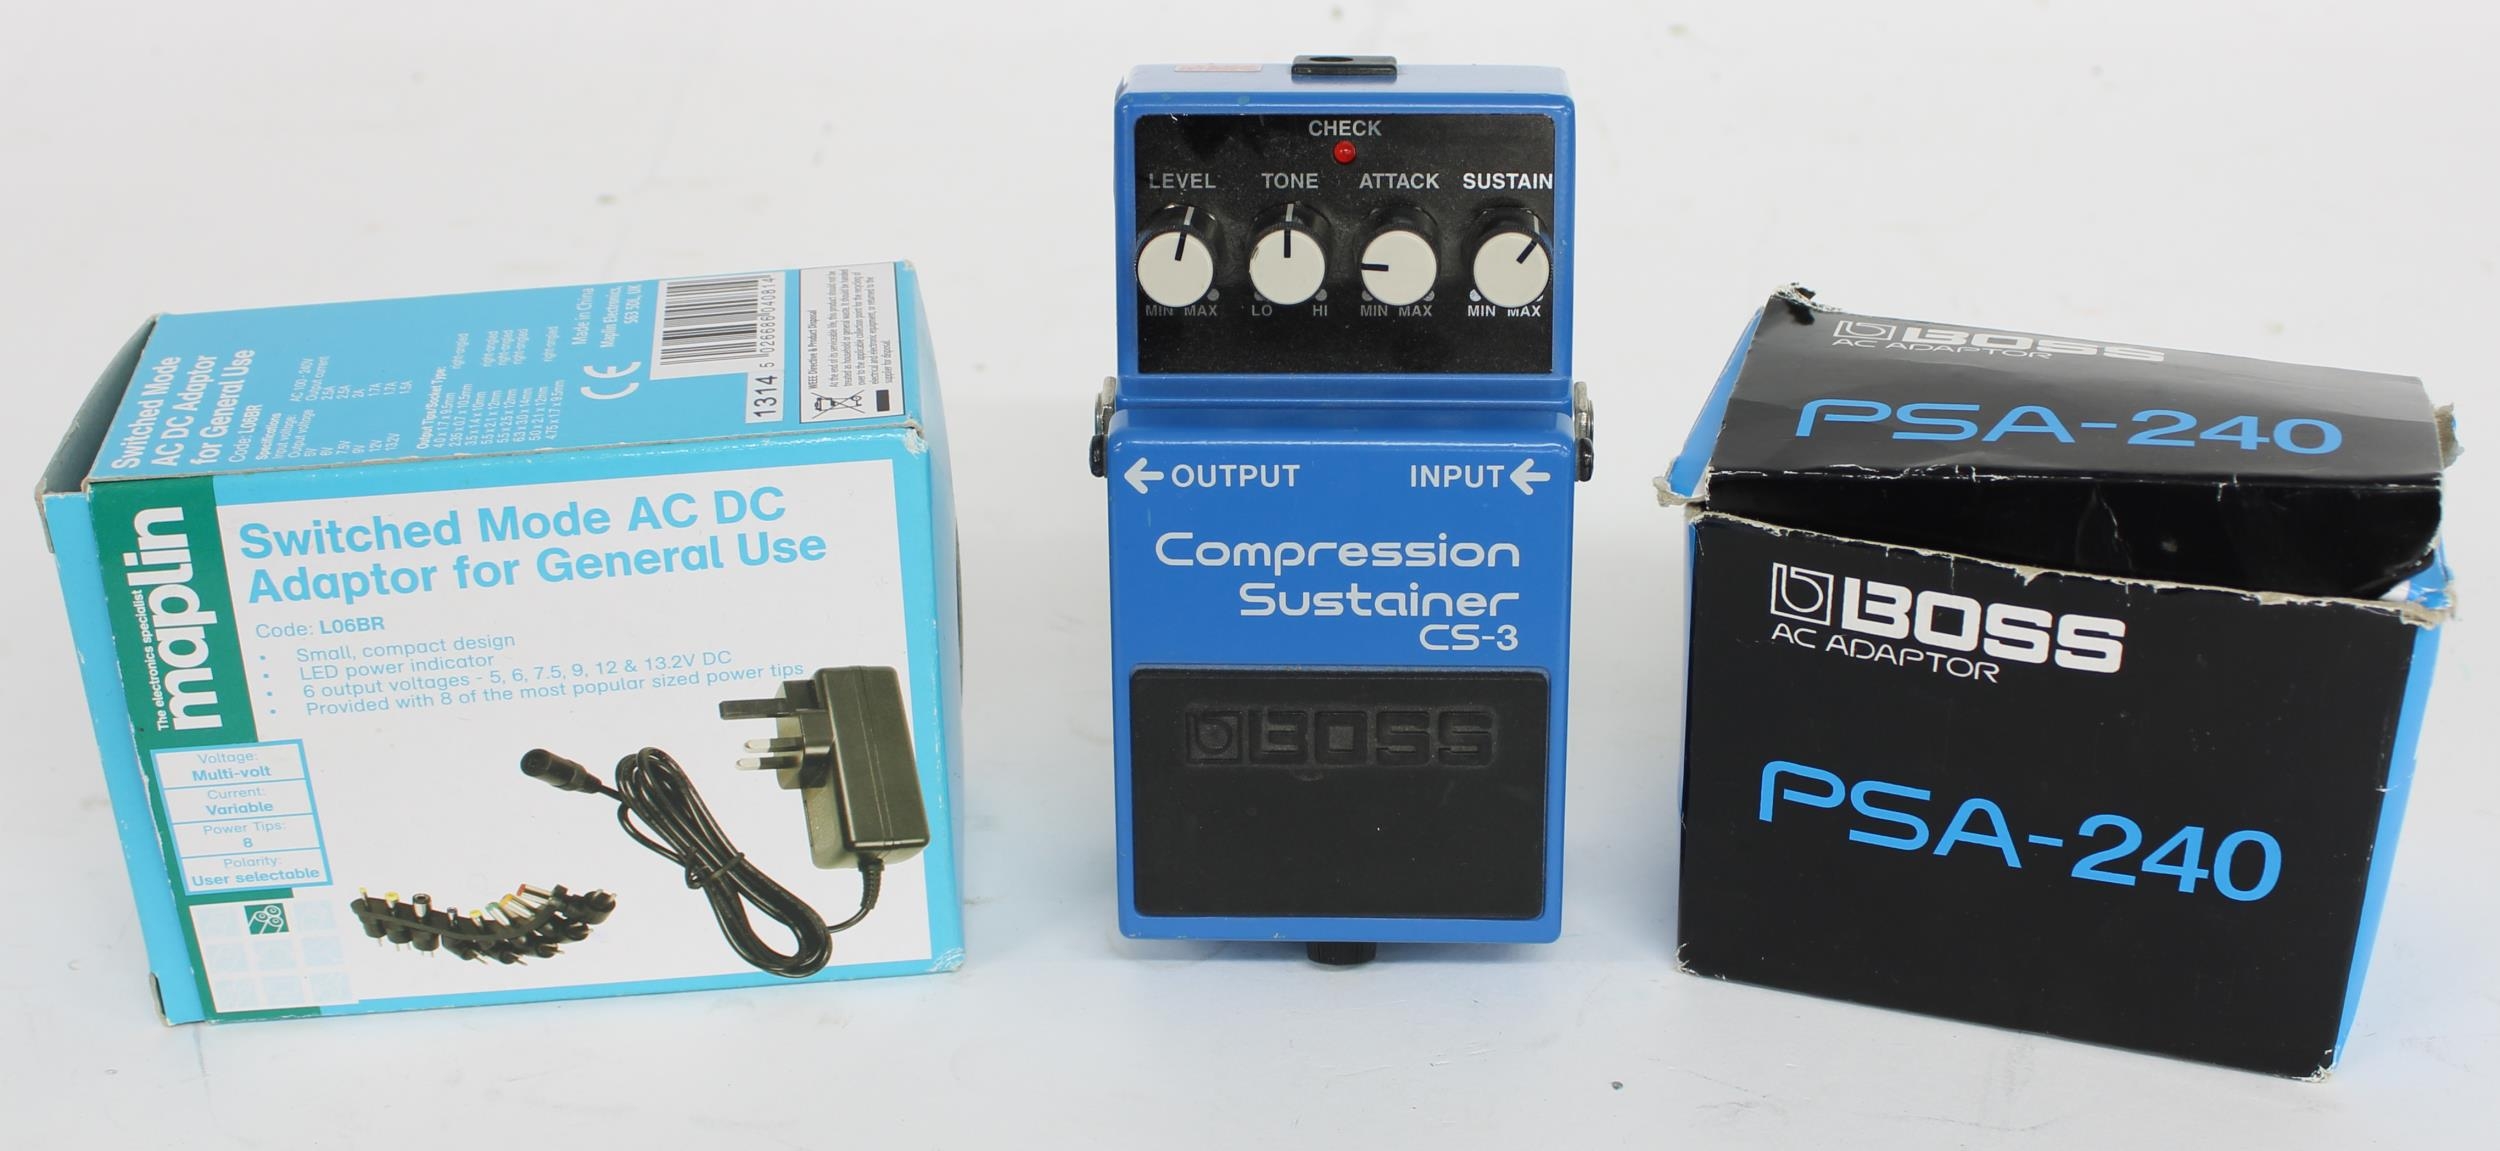 Boss CS-3 Compression Sustainer guitar pedal with Boss PSA-240 PSU; also a Maplin AC/DC adapter